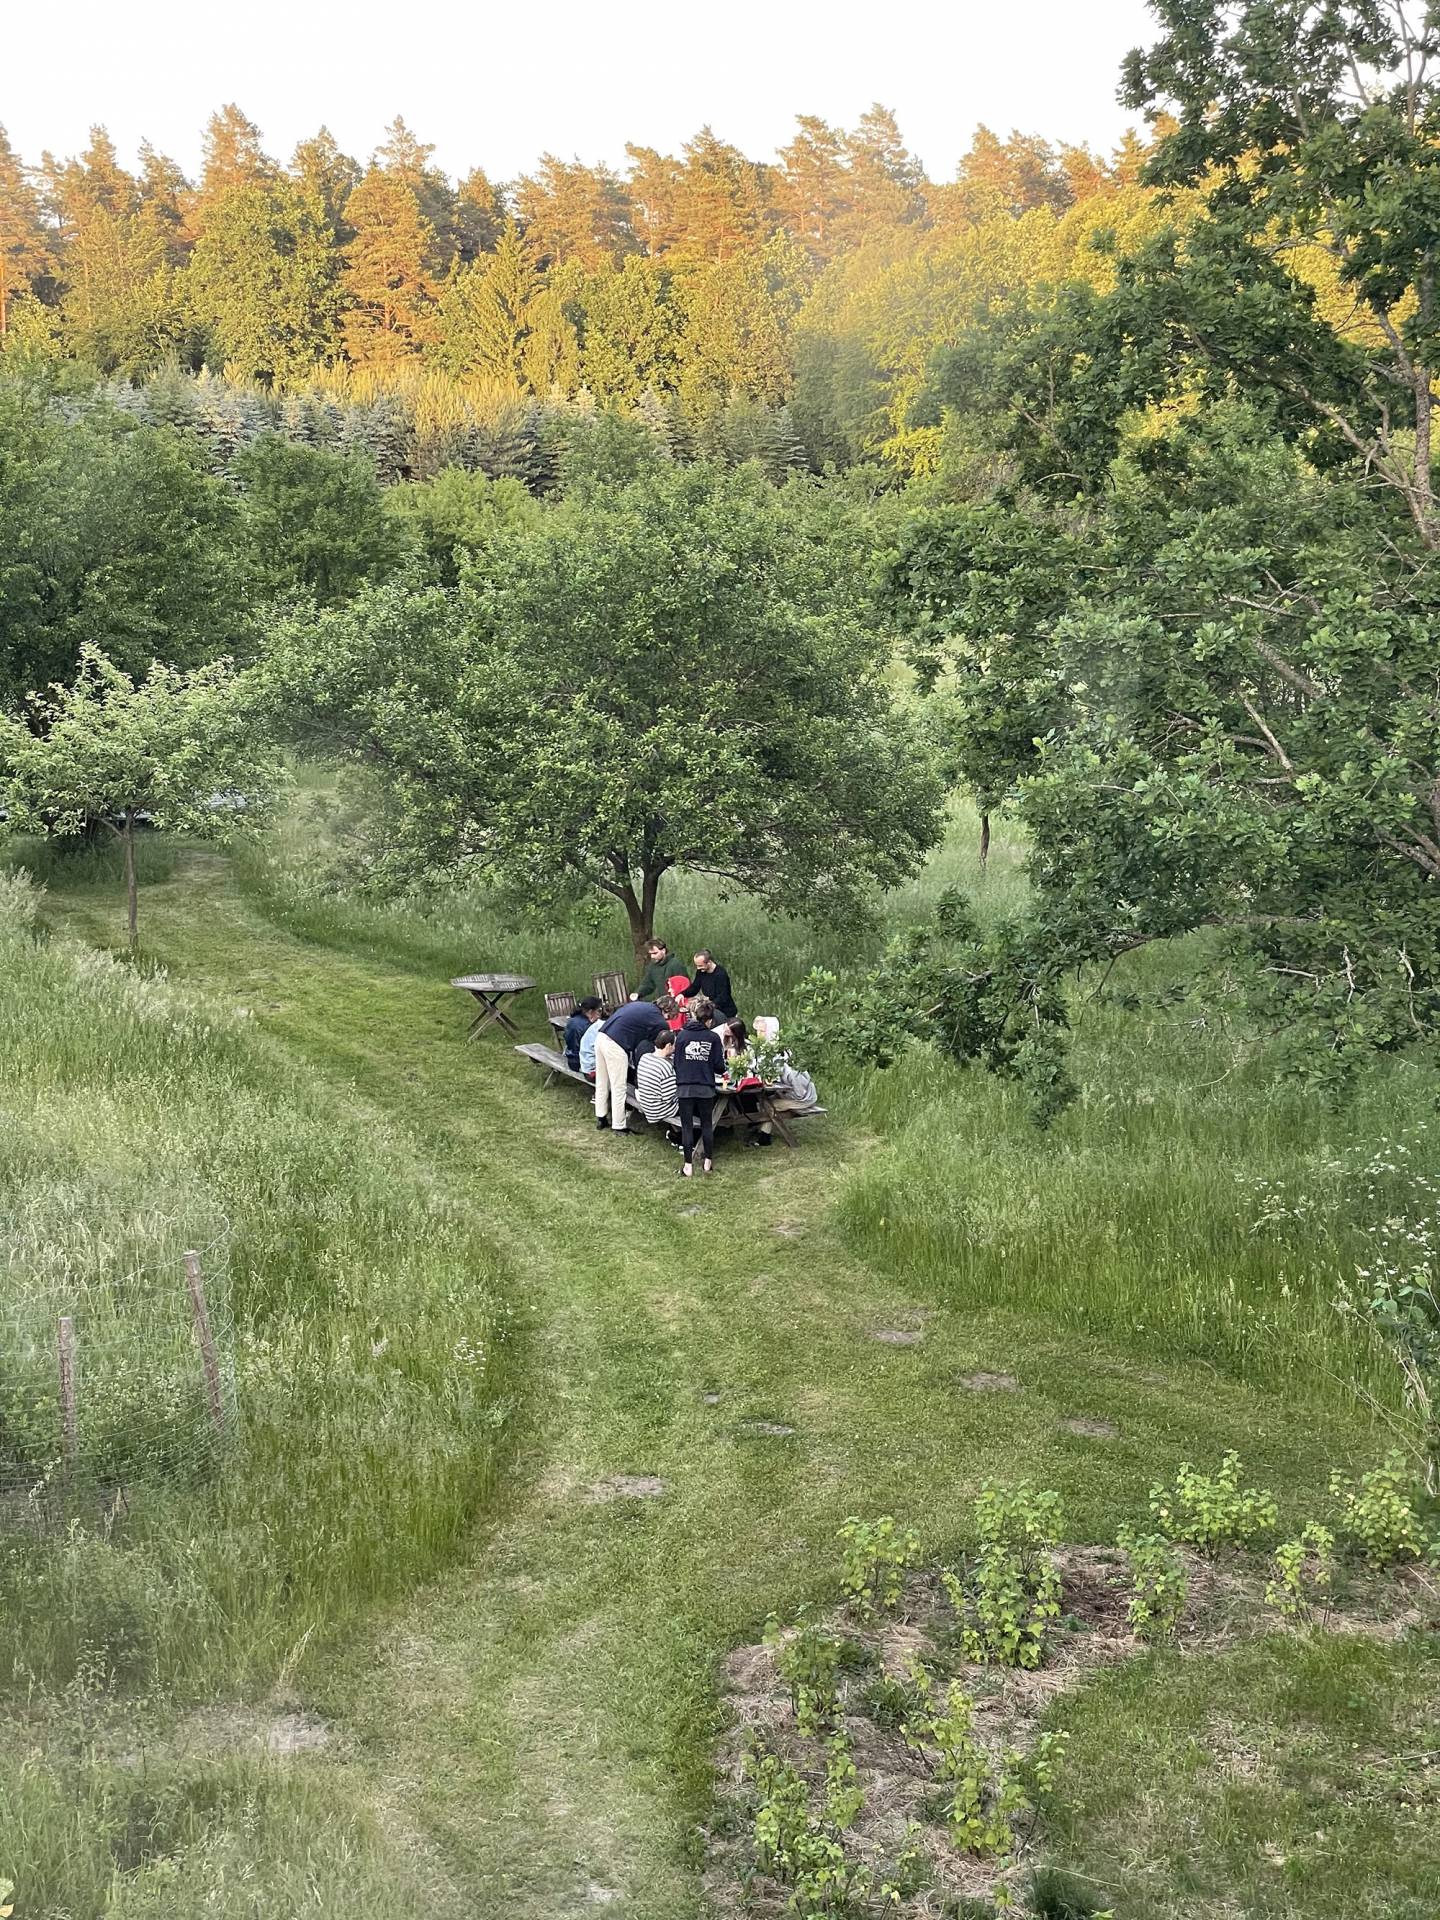 People gathering around a table in a nature environment.